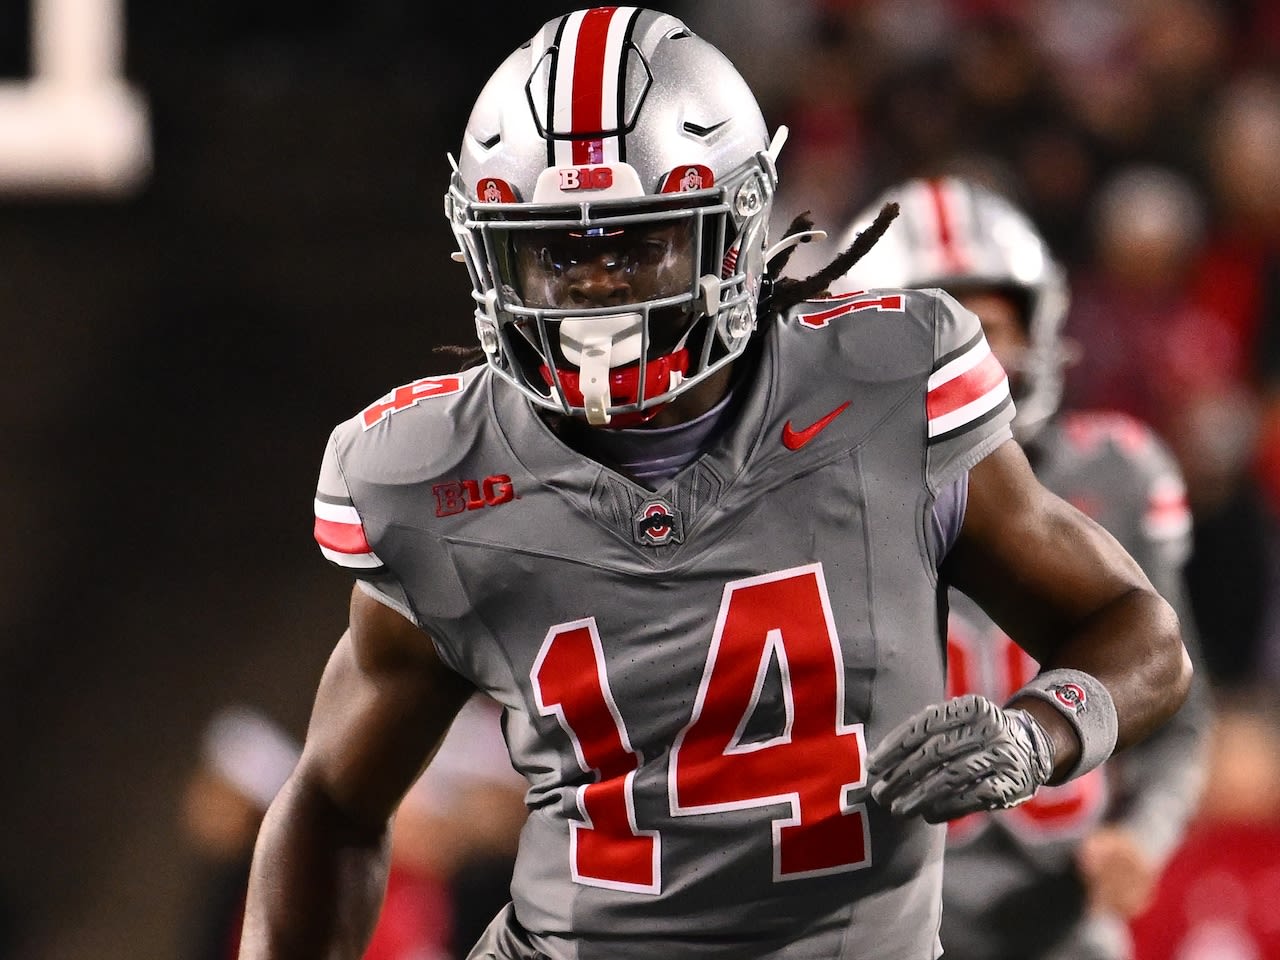 Ohio State safety re-enters transfer portal after 1 season with Buckeyes